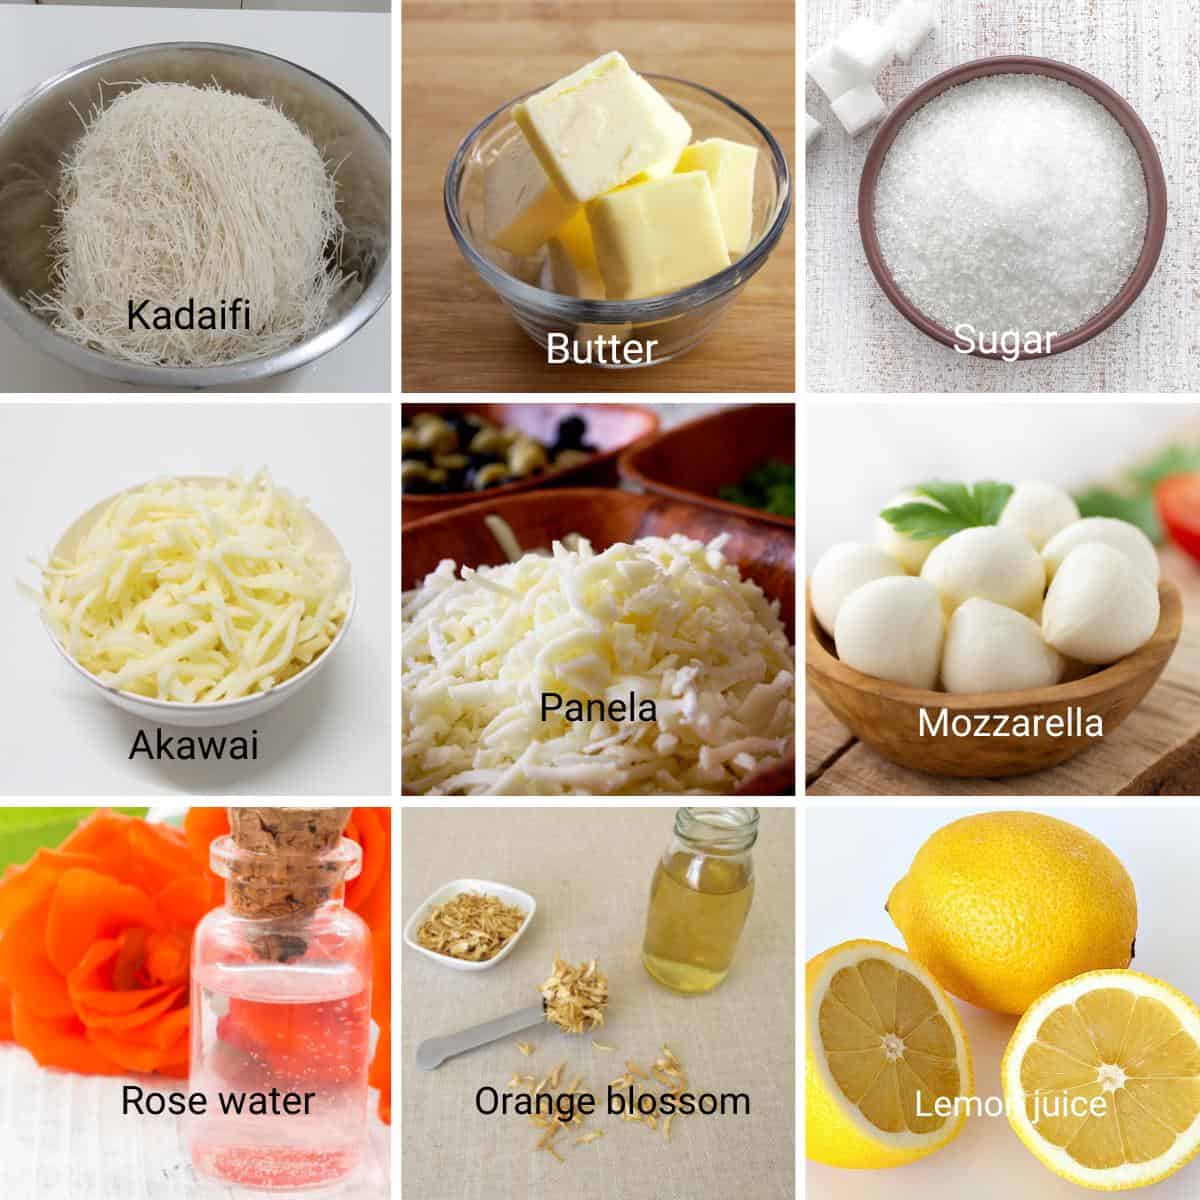 Ingredients for making cheese pastry knaffeh.